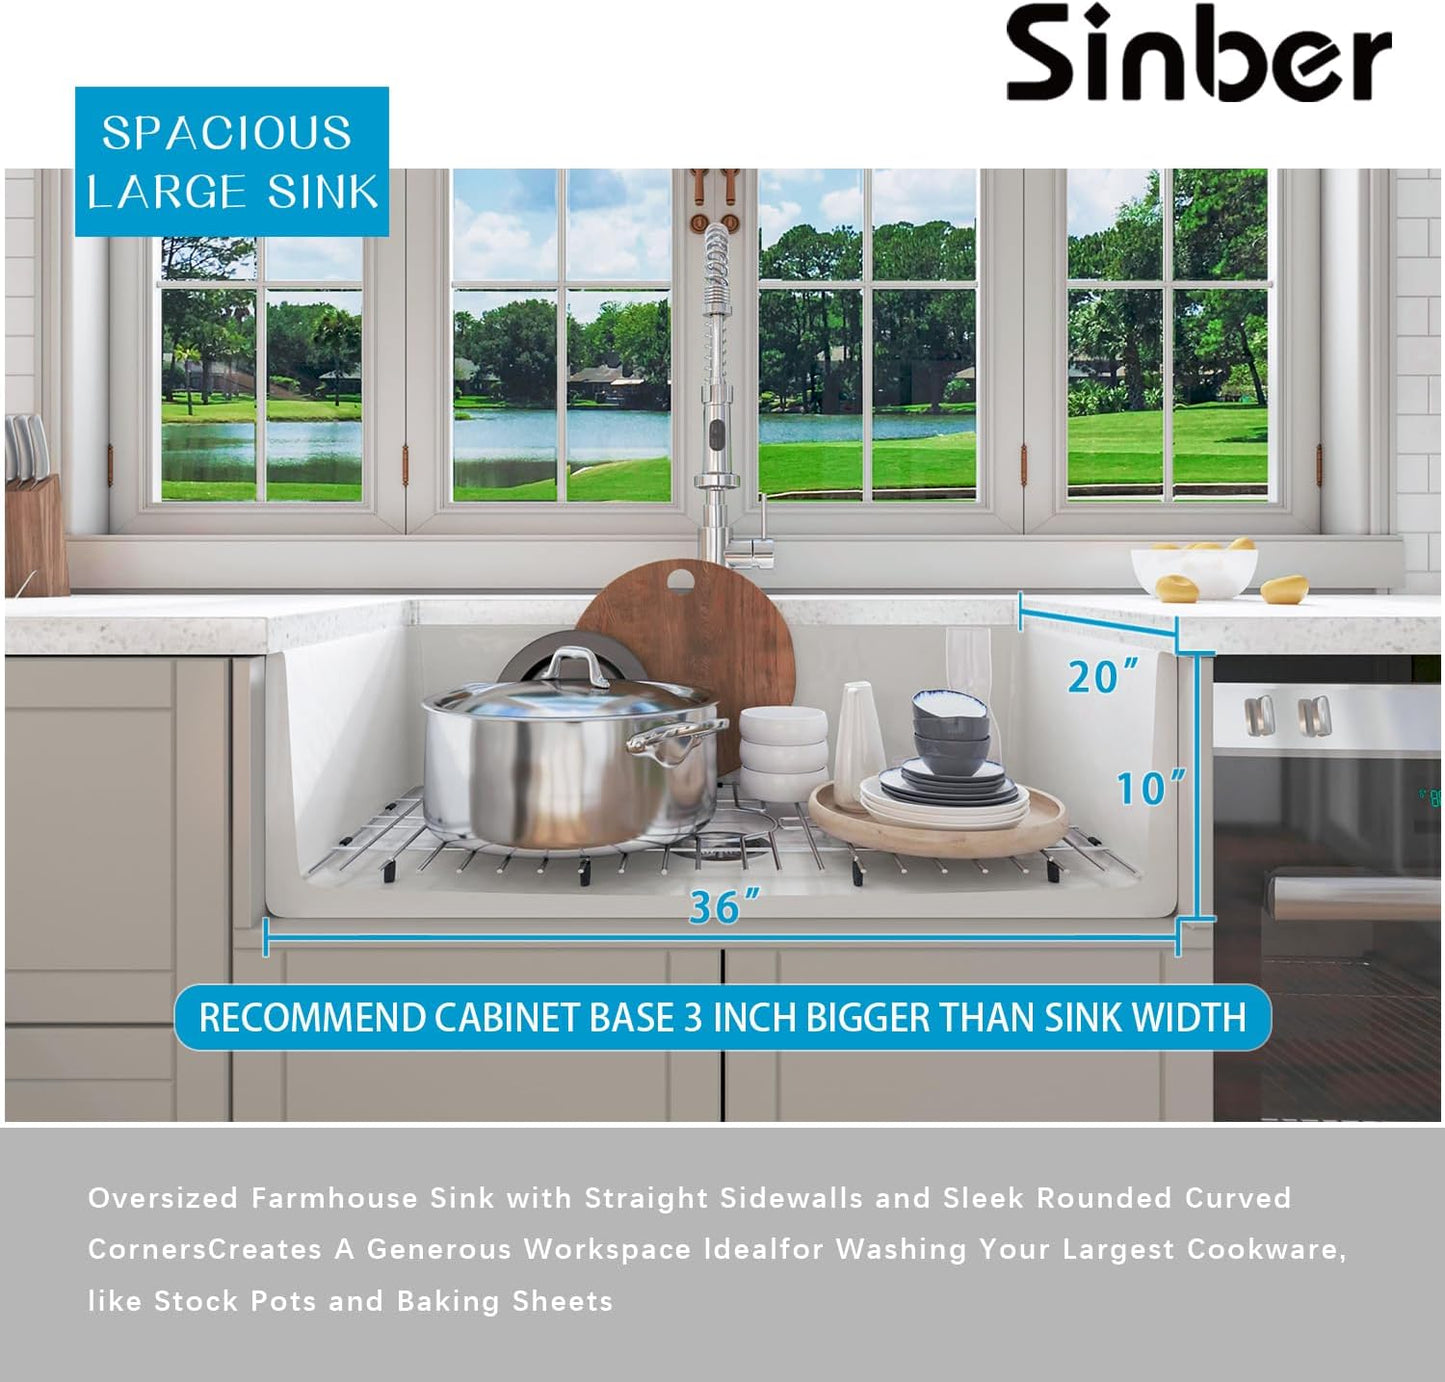 Sinber 36 Inch Farmhouse Apron Single Bowl Kitchen Sink with Fireclay White Finish 2 Accessories F3620S-OLA